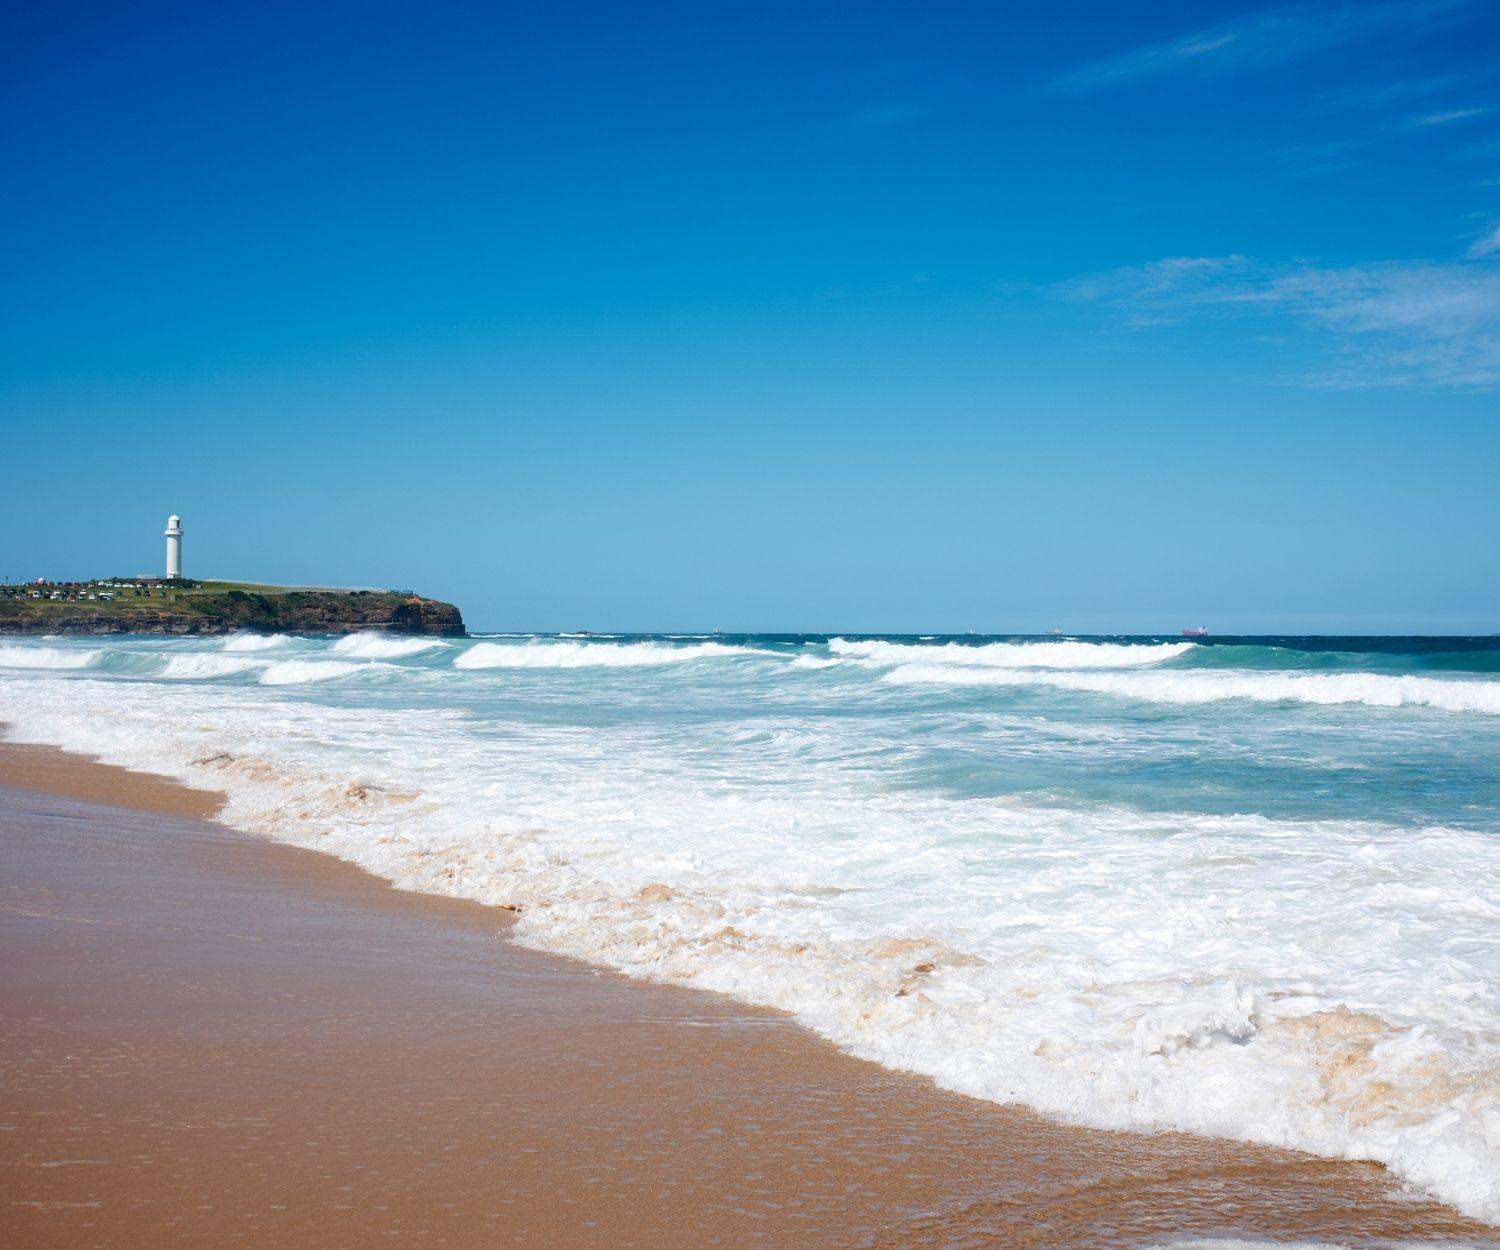 Wollongong beach with the Wollongong lighthouse in the background